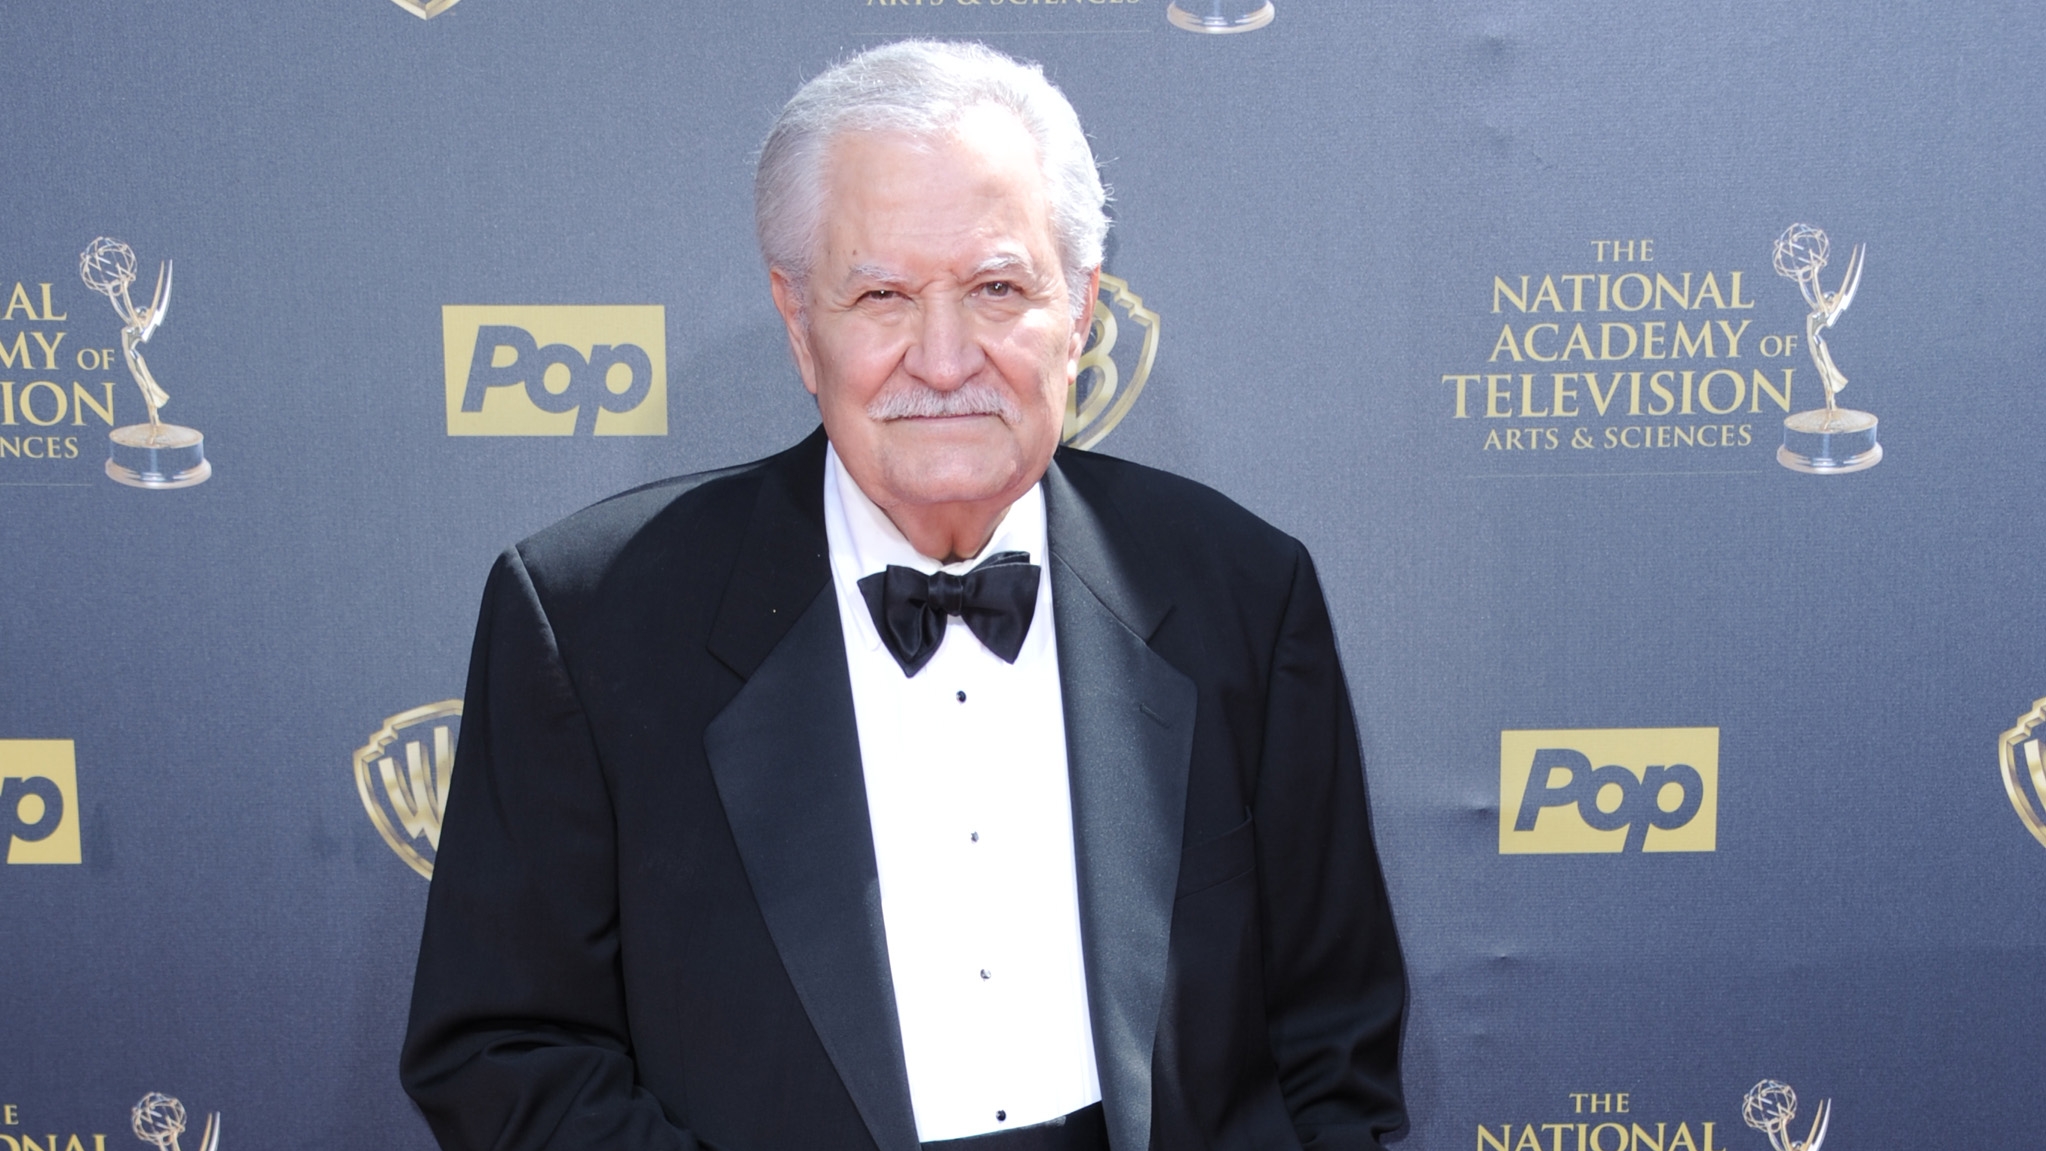 Days of Our Lives' actor John Aniston, Jennifer Aniston's father